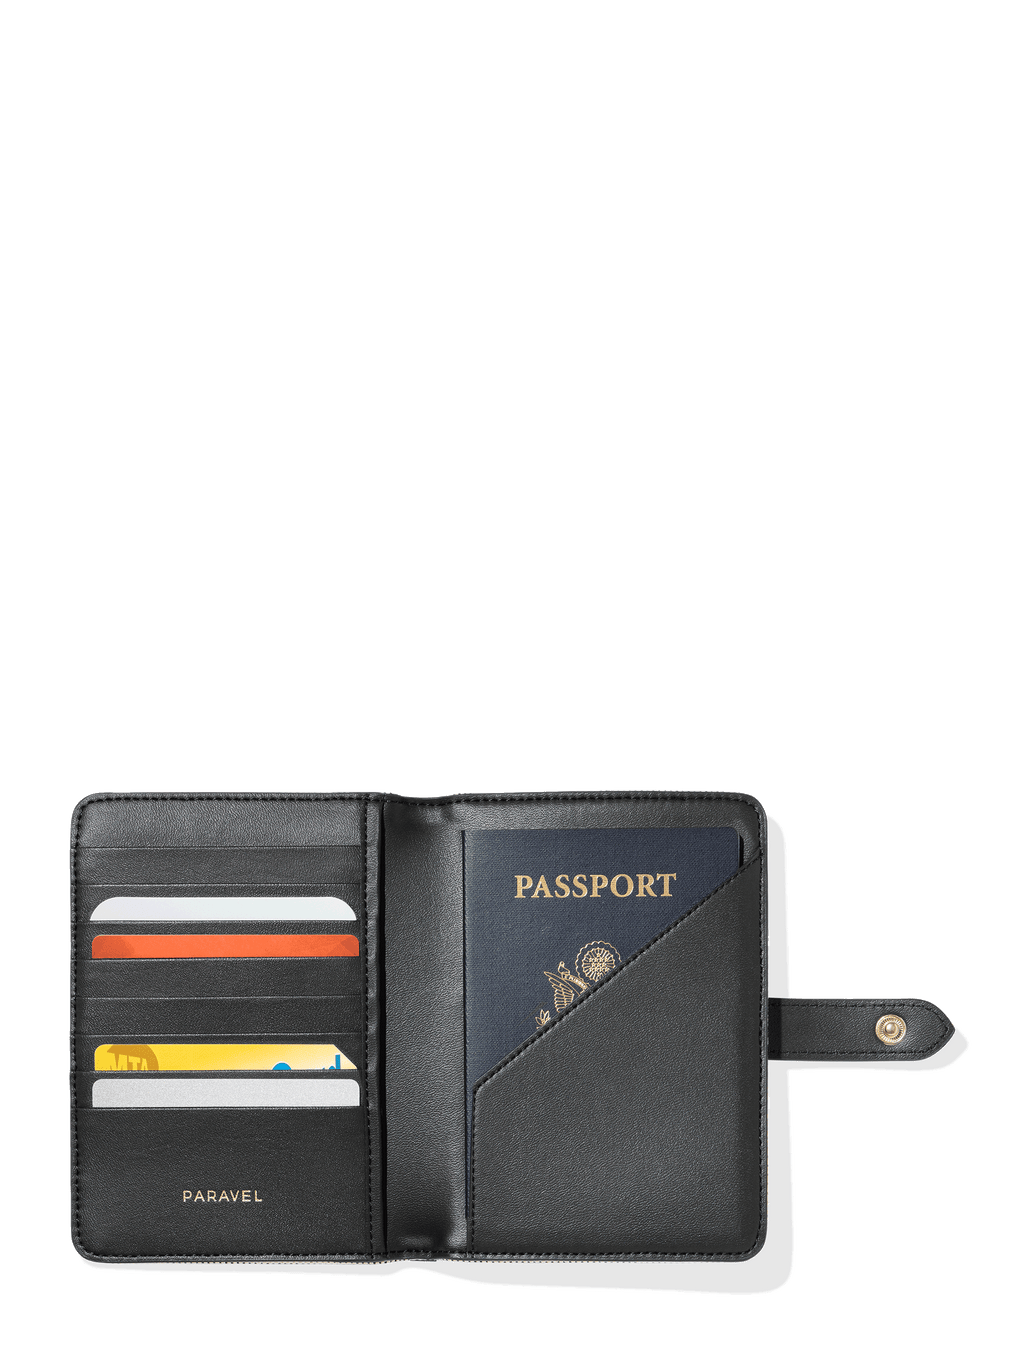 Buy FREE Shipping for Order 150usd Passport Cover Online in India 